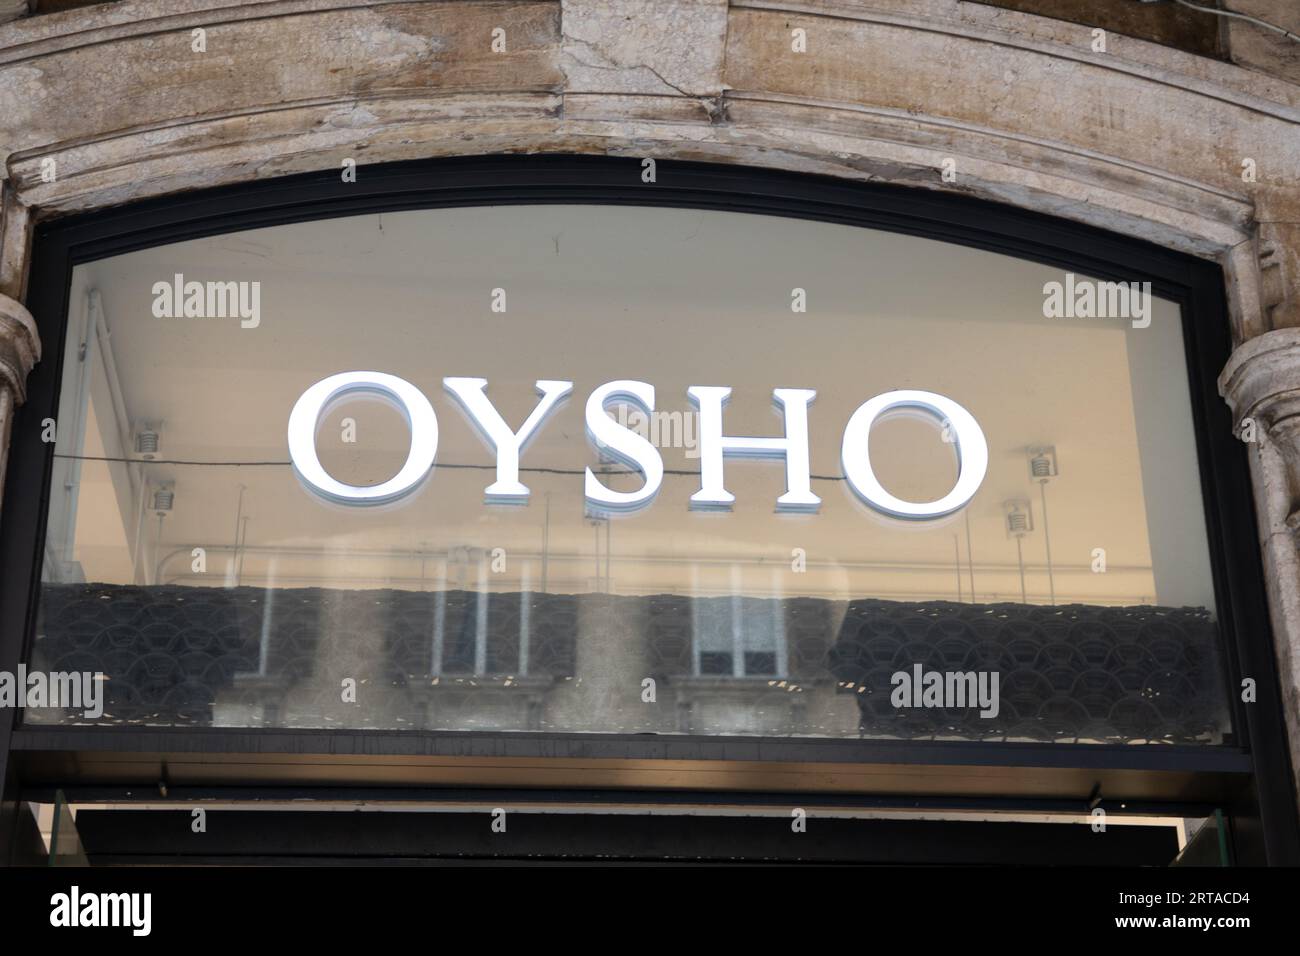 https://c8.alamy.com/comp/2RTACD4/milan-italy-09-06-2023-oysho-sport-brand-text-facade-entrance-store-signage-and-logo-sign-on-chain-shop-wall-facade-2RTACD4.jpg